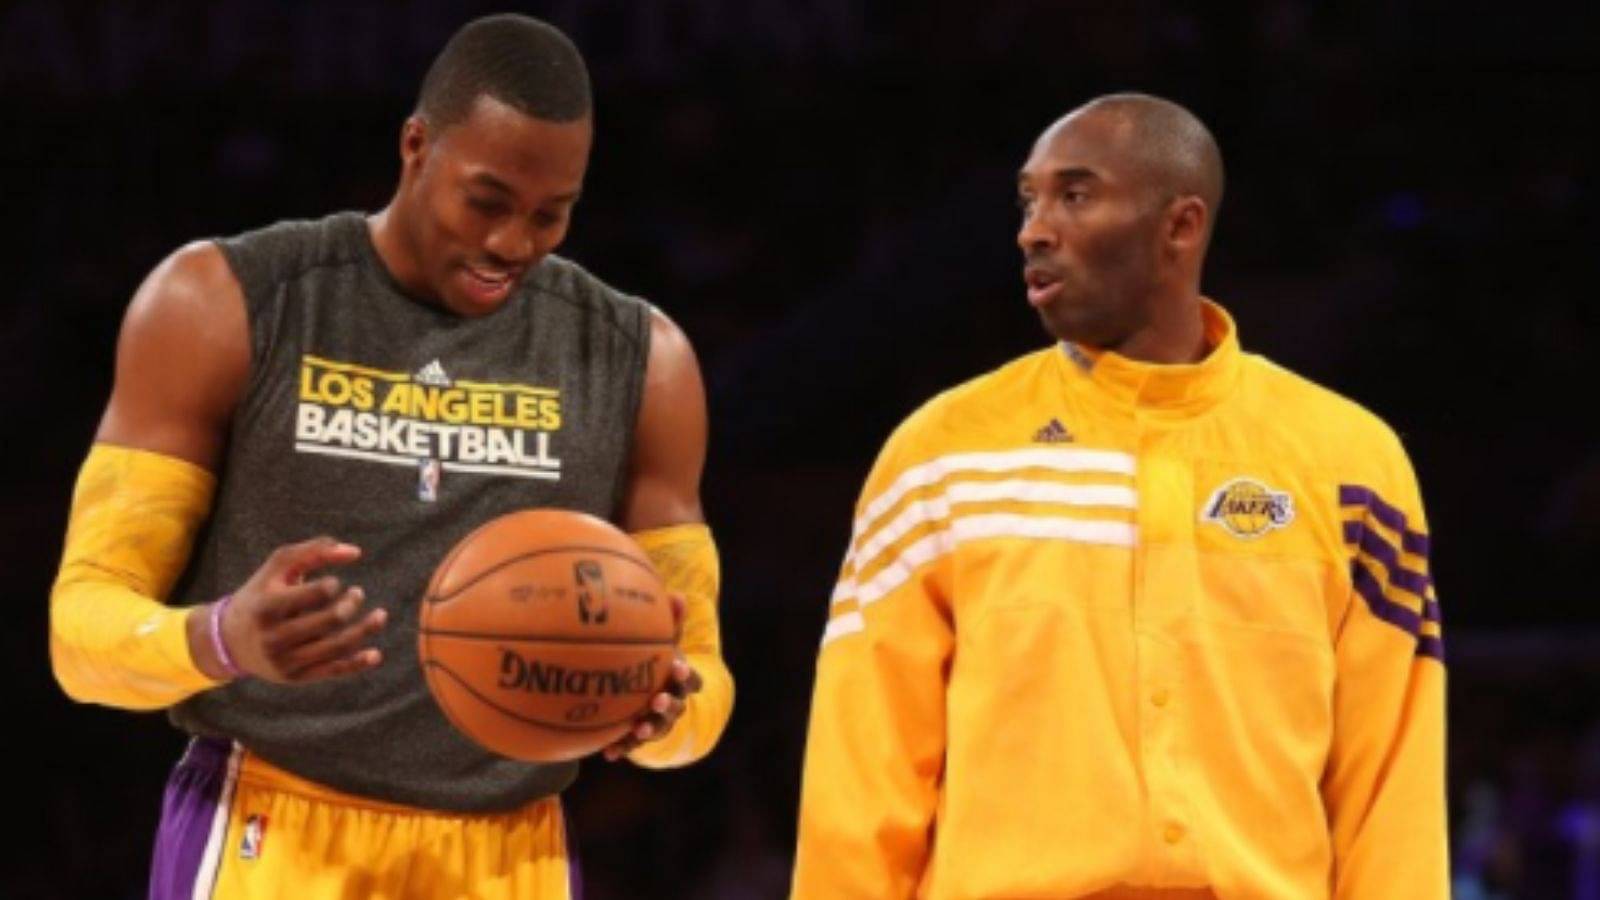 "None of the Kobe Bryant thing you told ever happened": Dwight Howard shuts down Jalen Rose for telling a made-up story